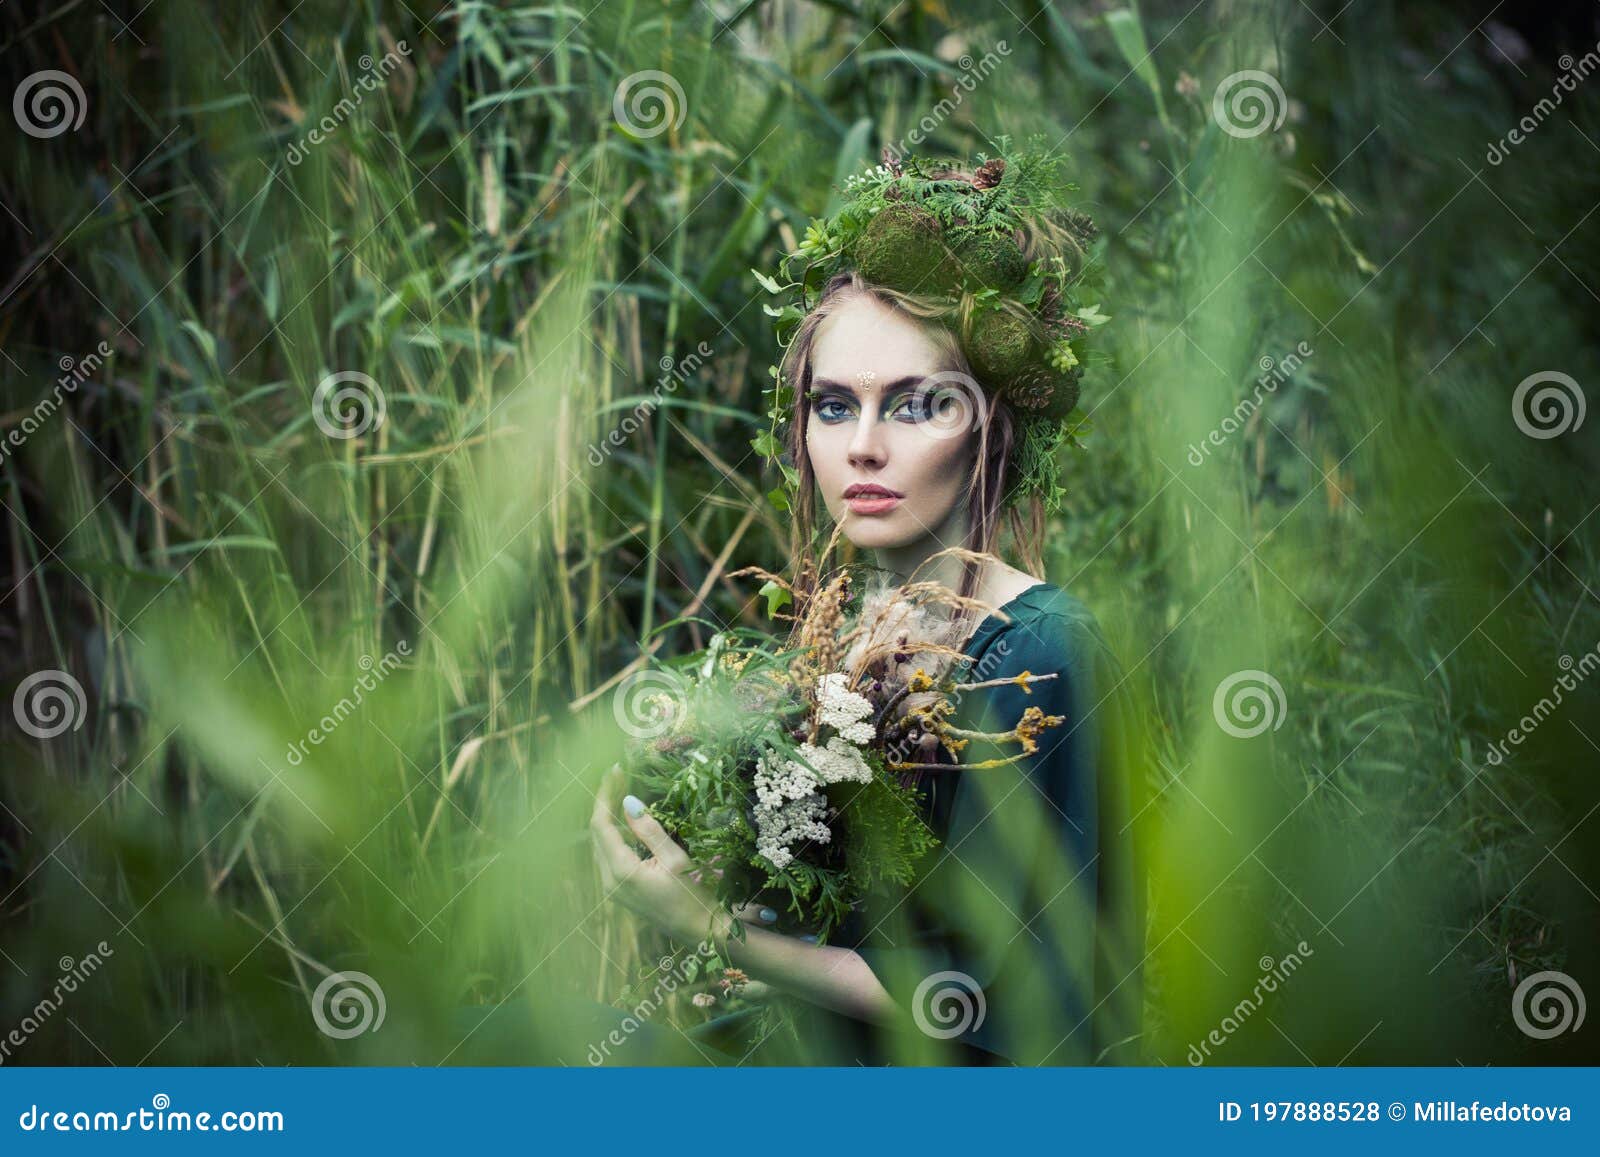 Beautiful Fairy Witch Woman in Green Grass Outdoors. Halloween ...